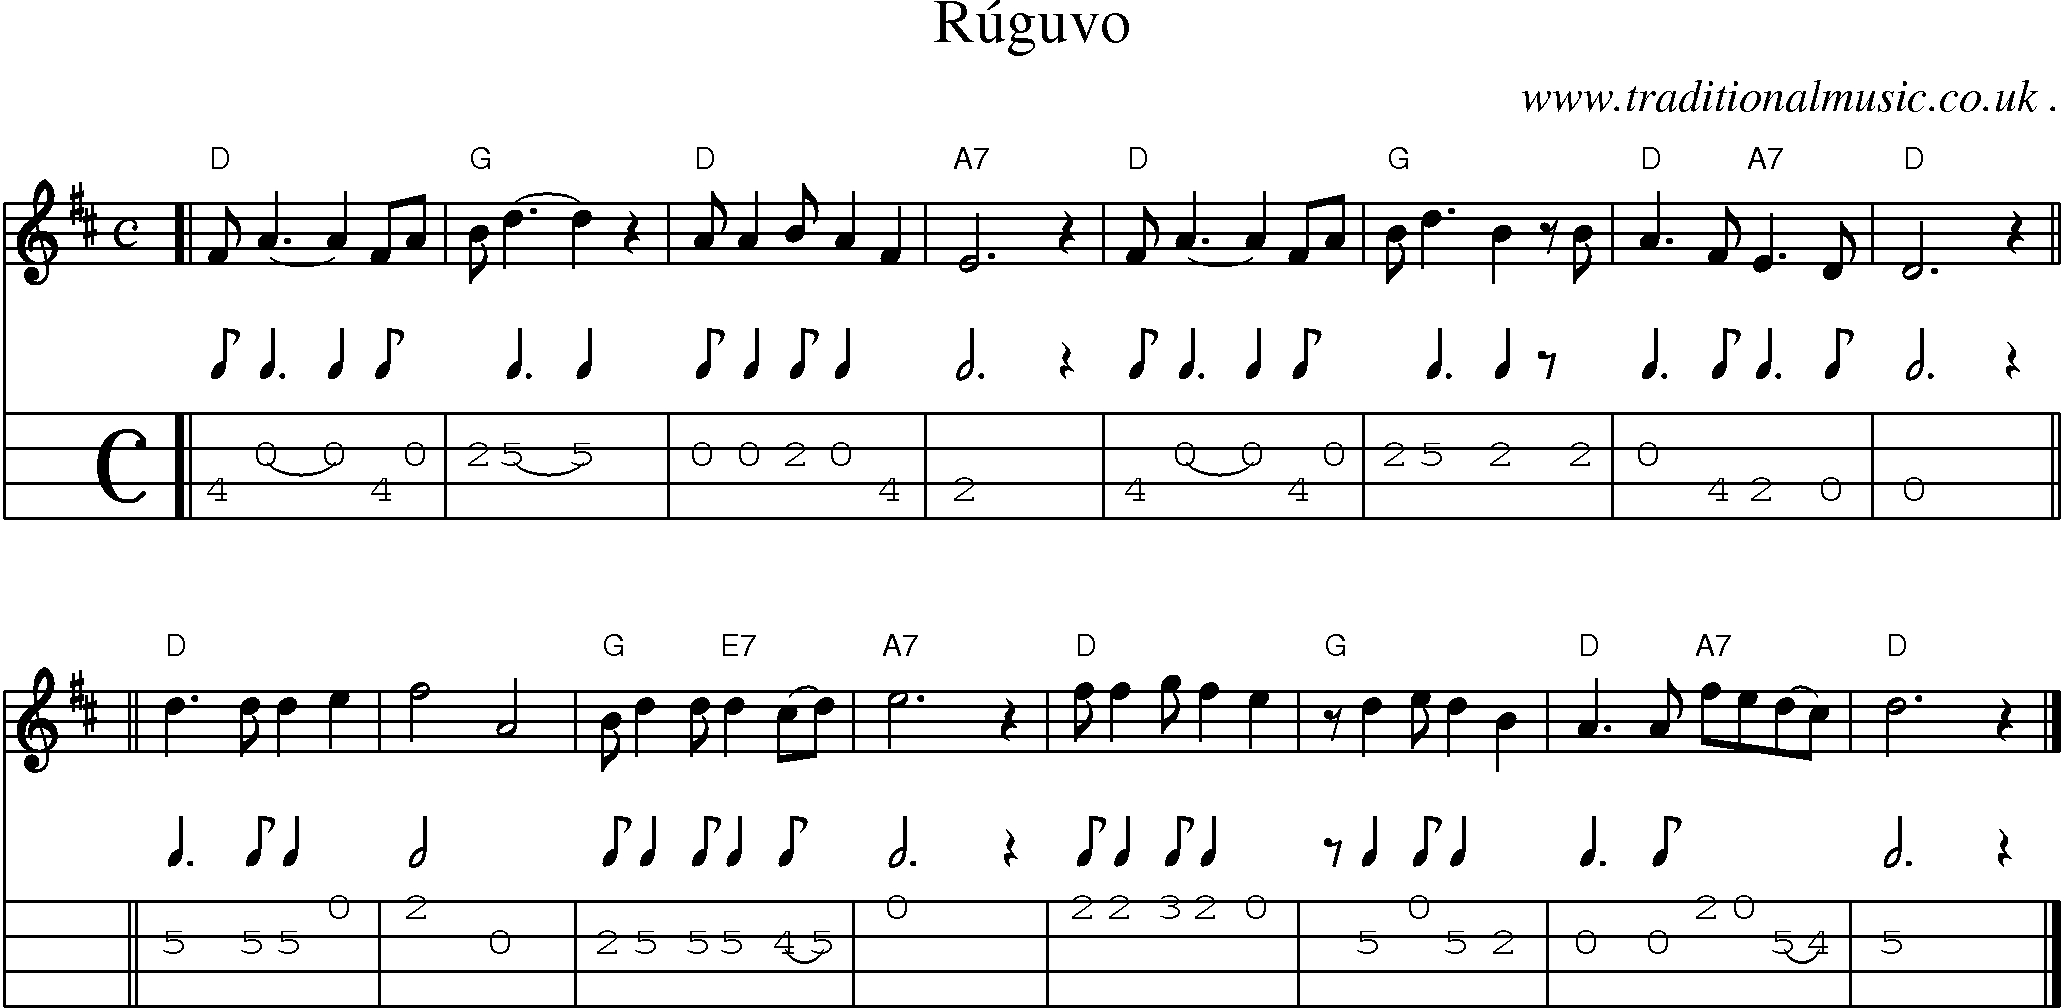 Sheet-music  score, Chords and Mandolin Tabs for Ruguvo